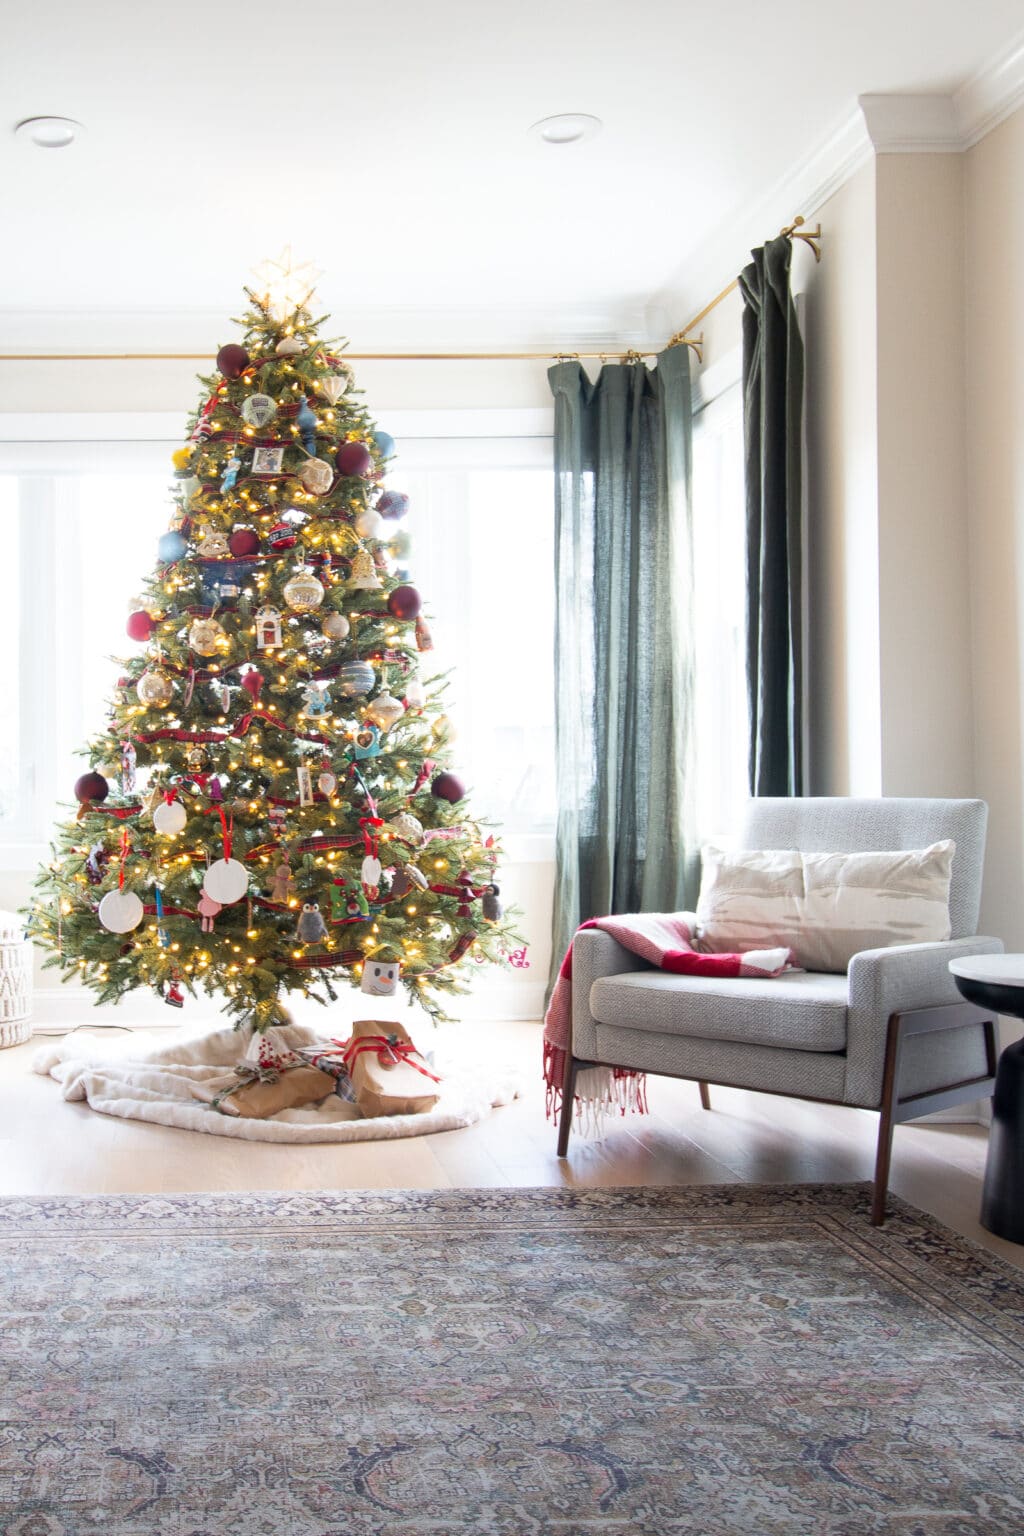 Our Christmas tree in our simple holiday home tour